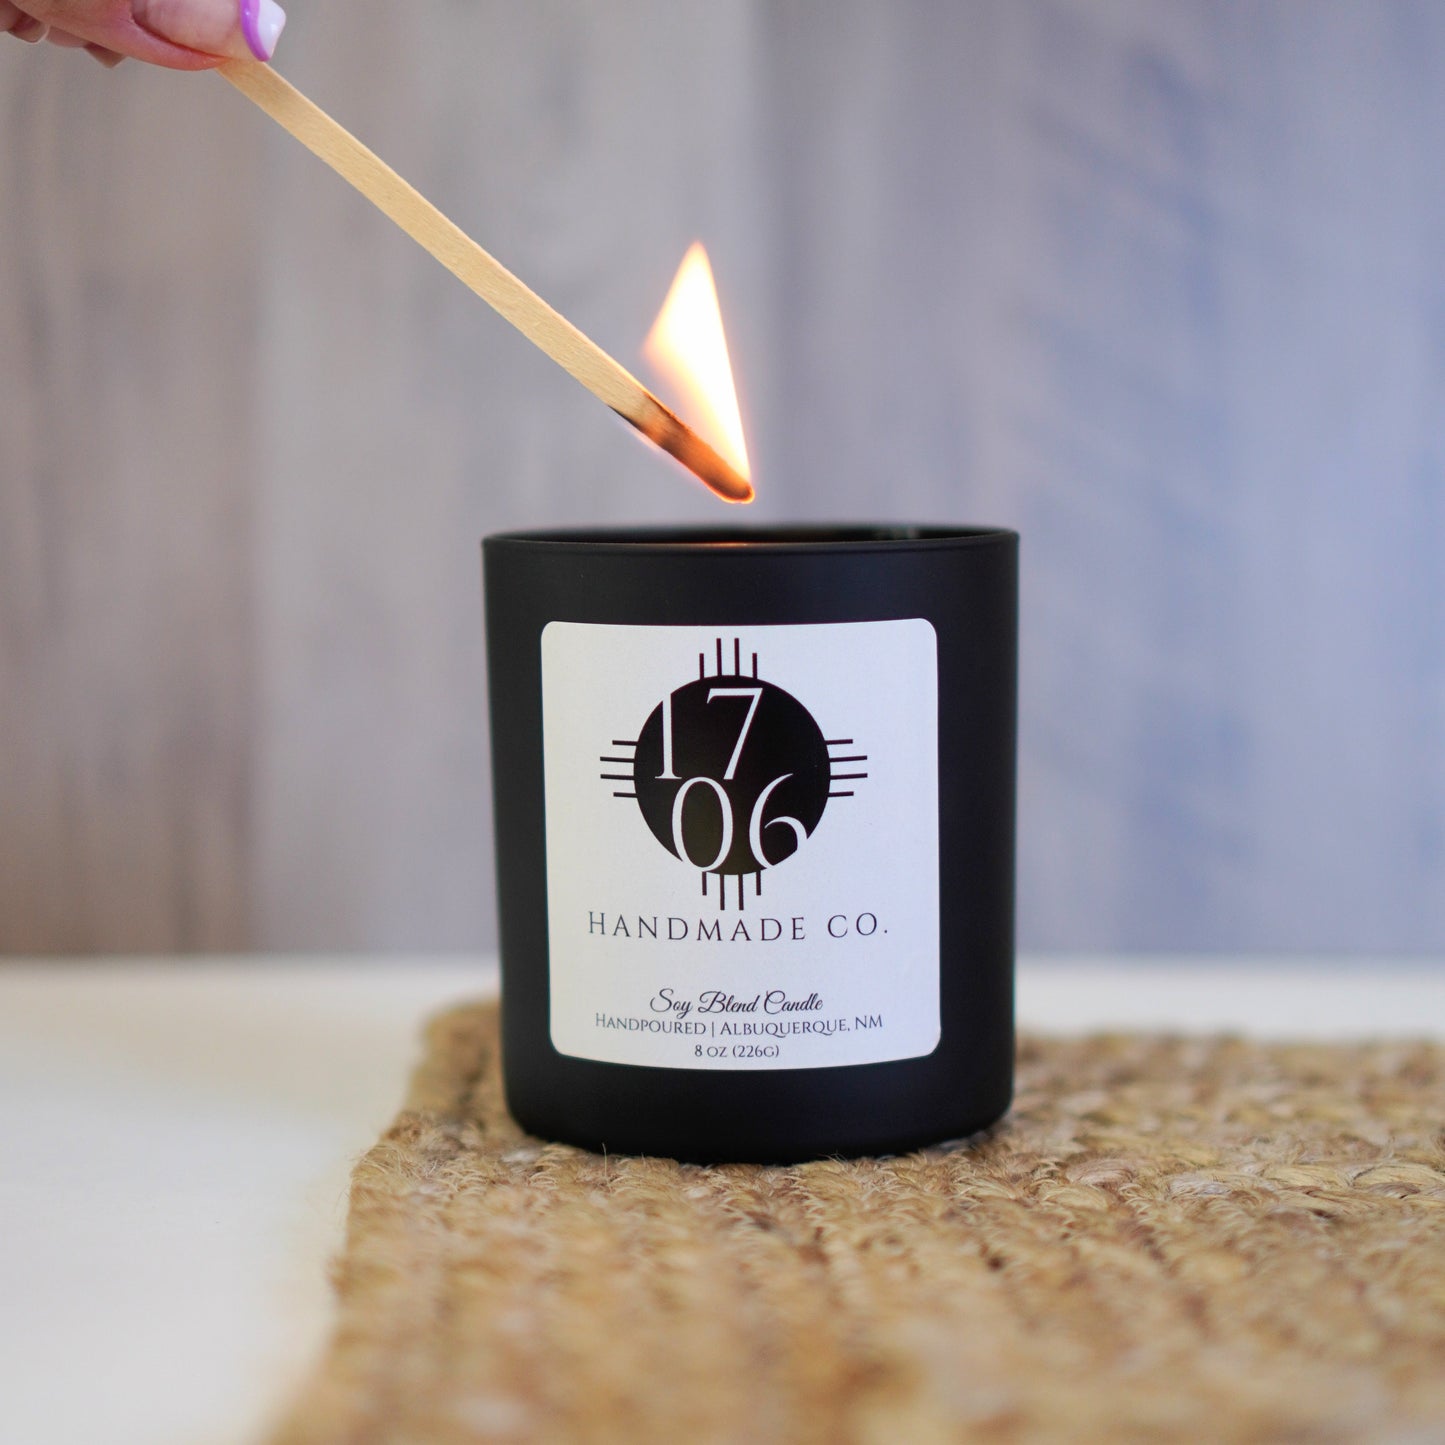 8 oz. Soy Blend Candle